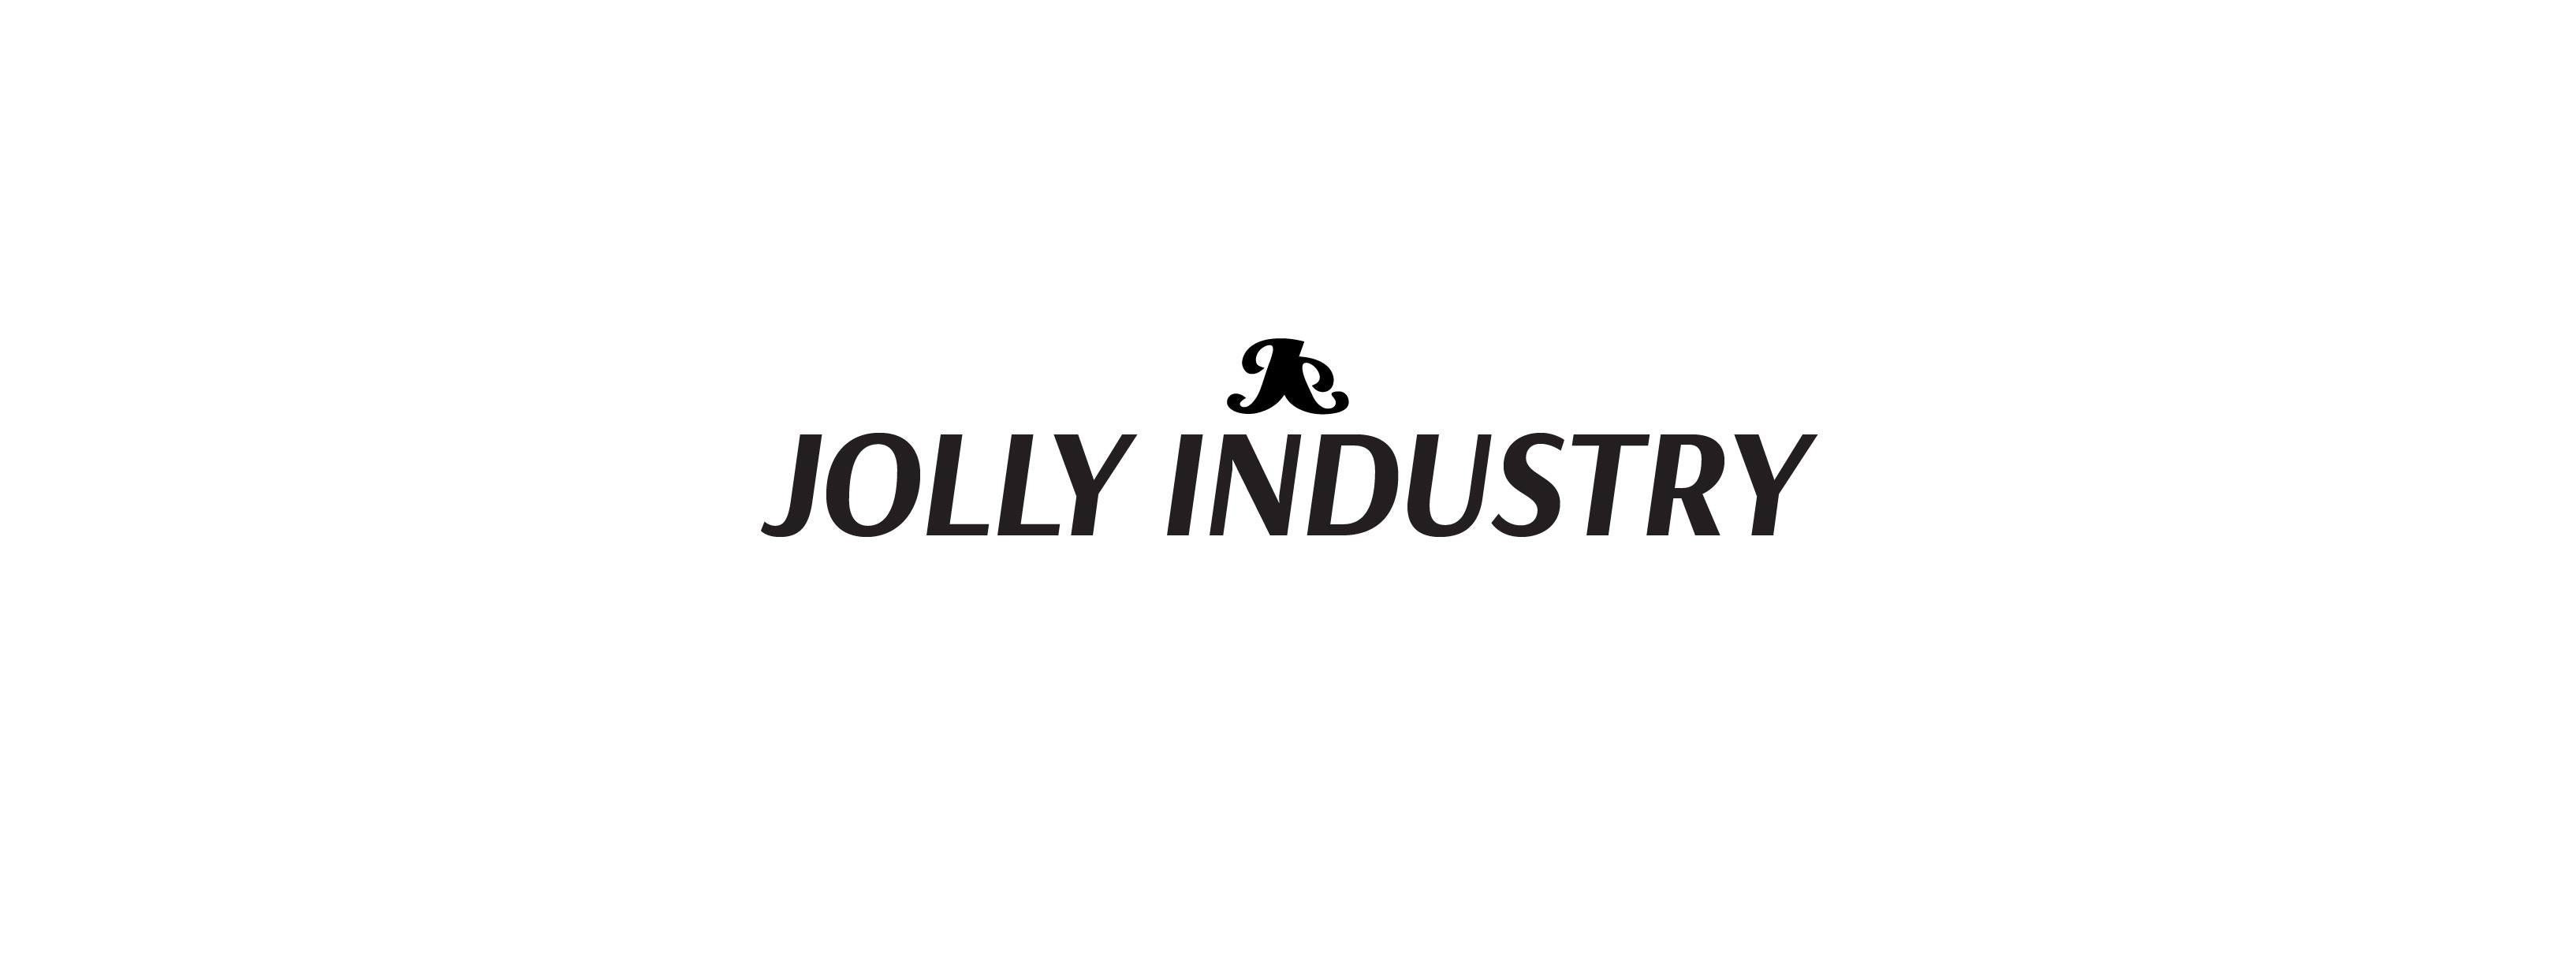 Jolly Industry Jolly Industry Awesome Video Ad